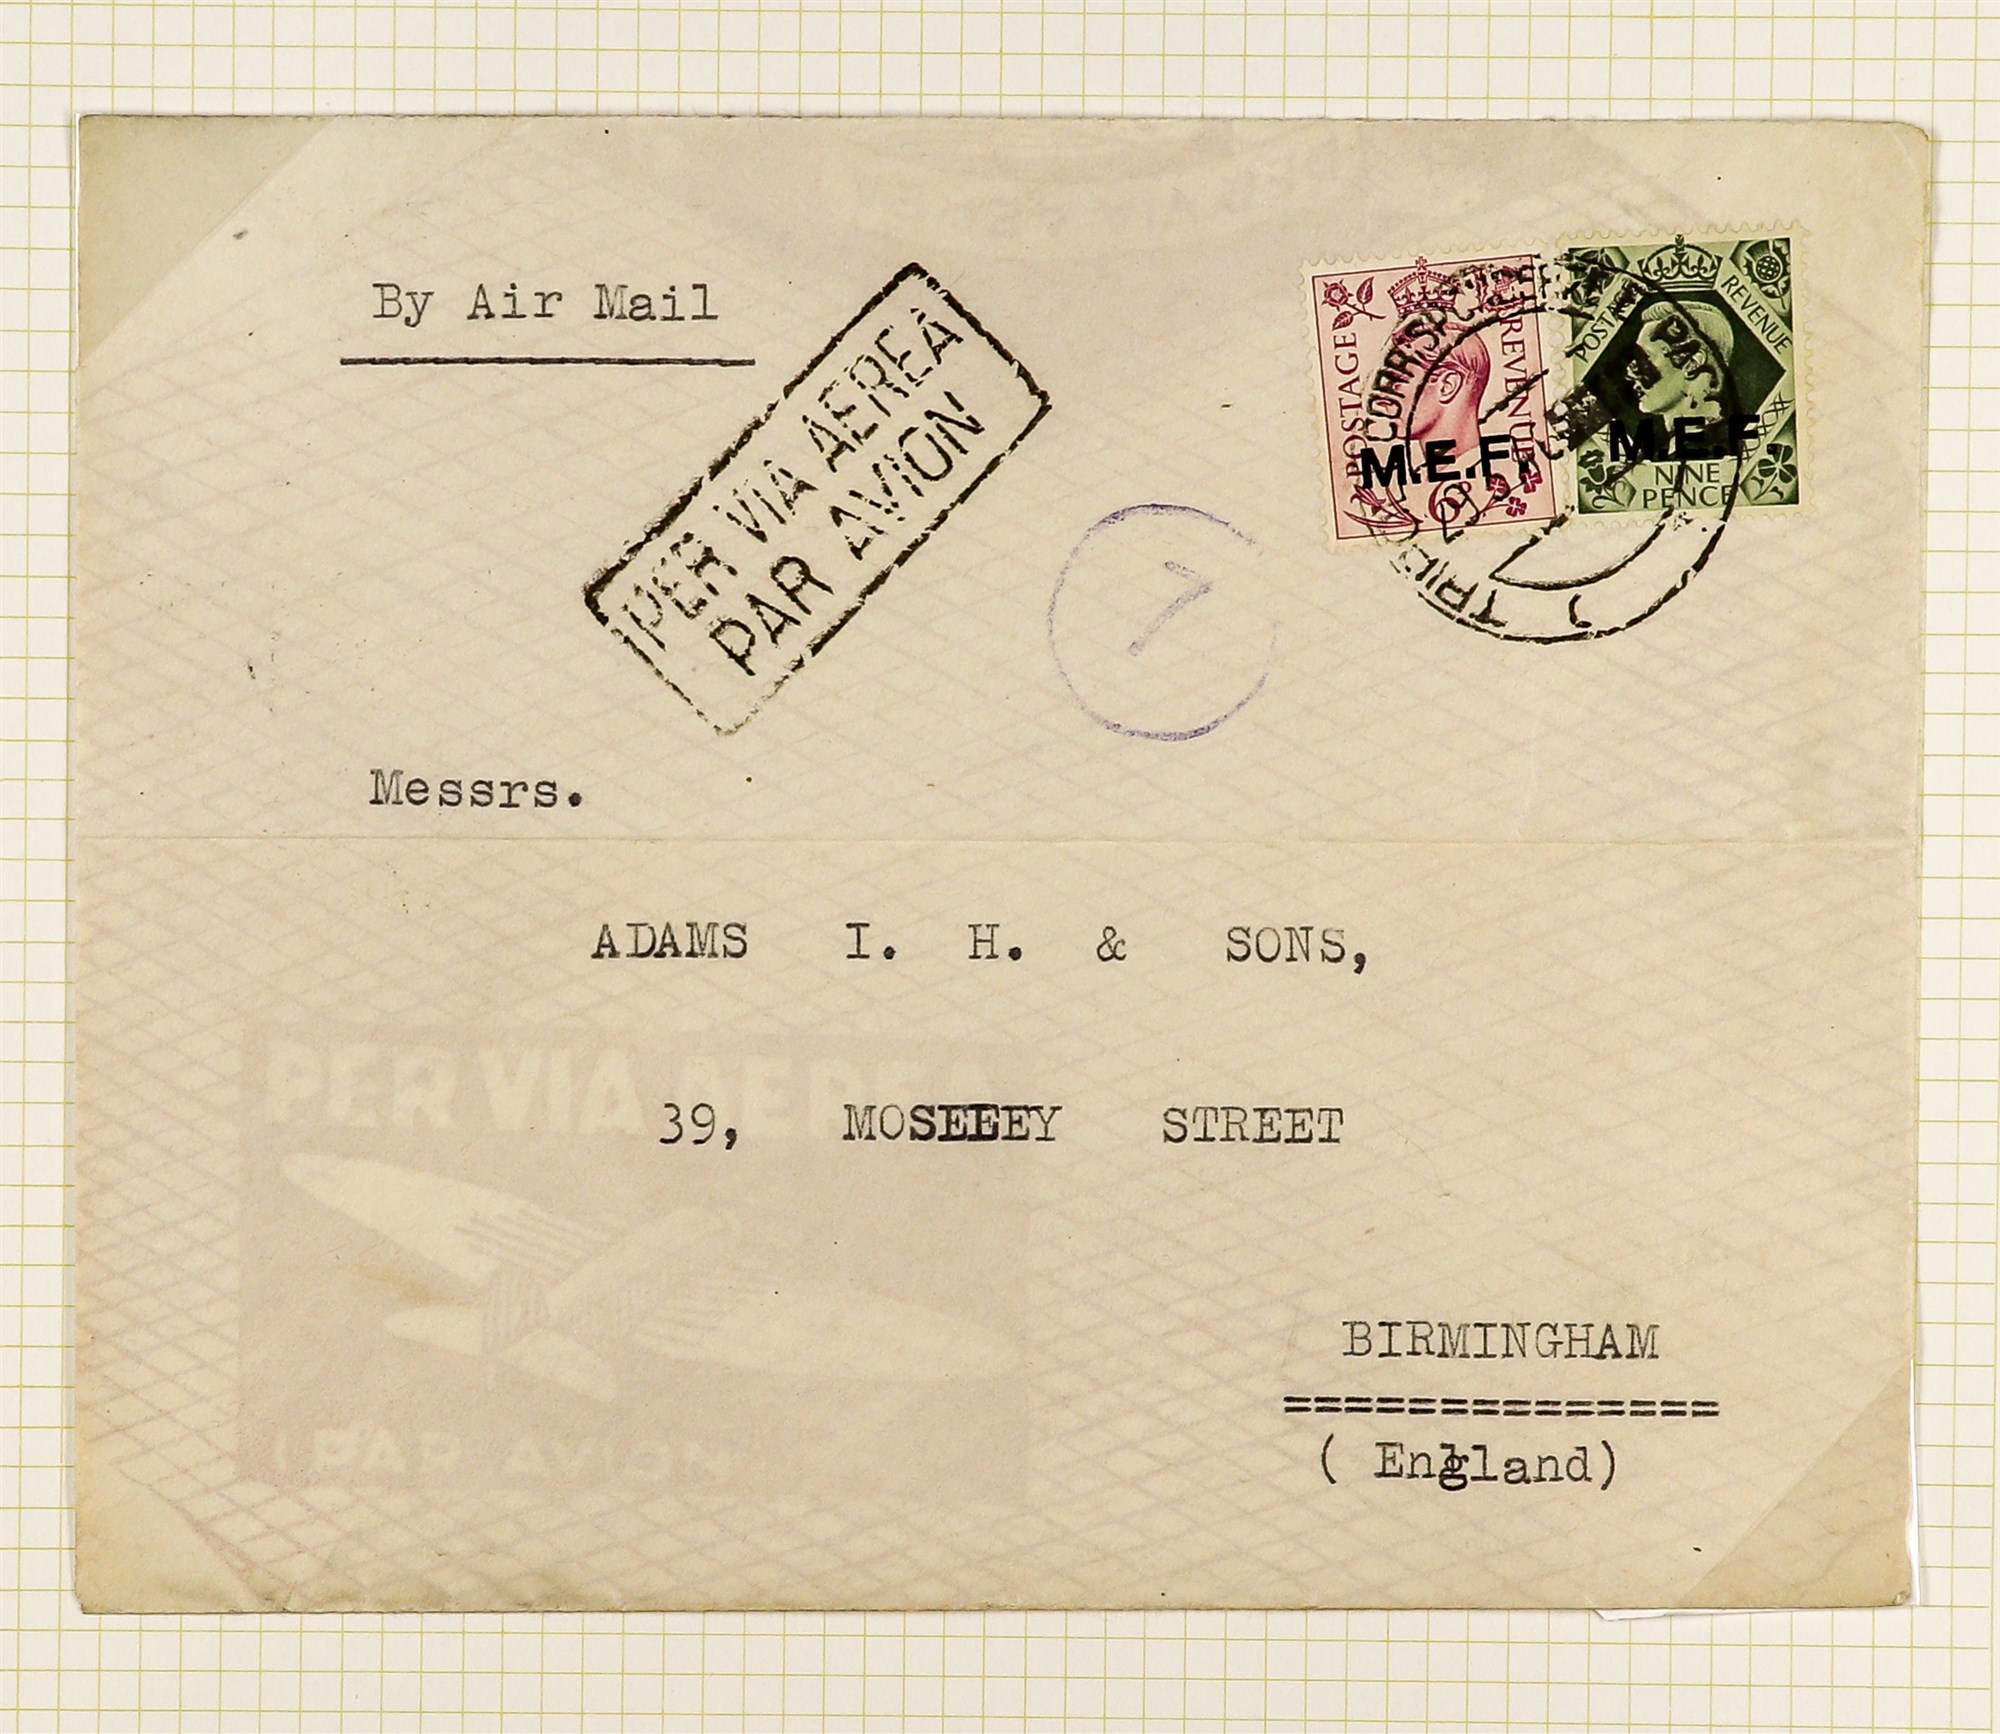 BR. OCC. ITAL. COL. M.E.F. 1943 - 1949 COVERS nicely written up collection of 19 items on album - Image 7 of 14